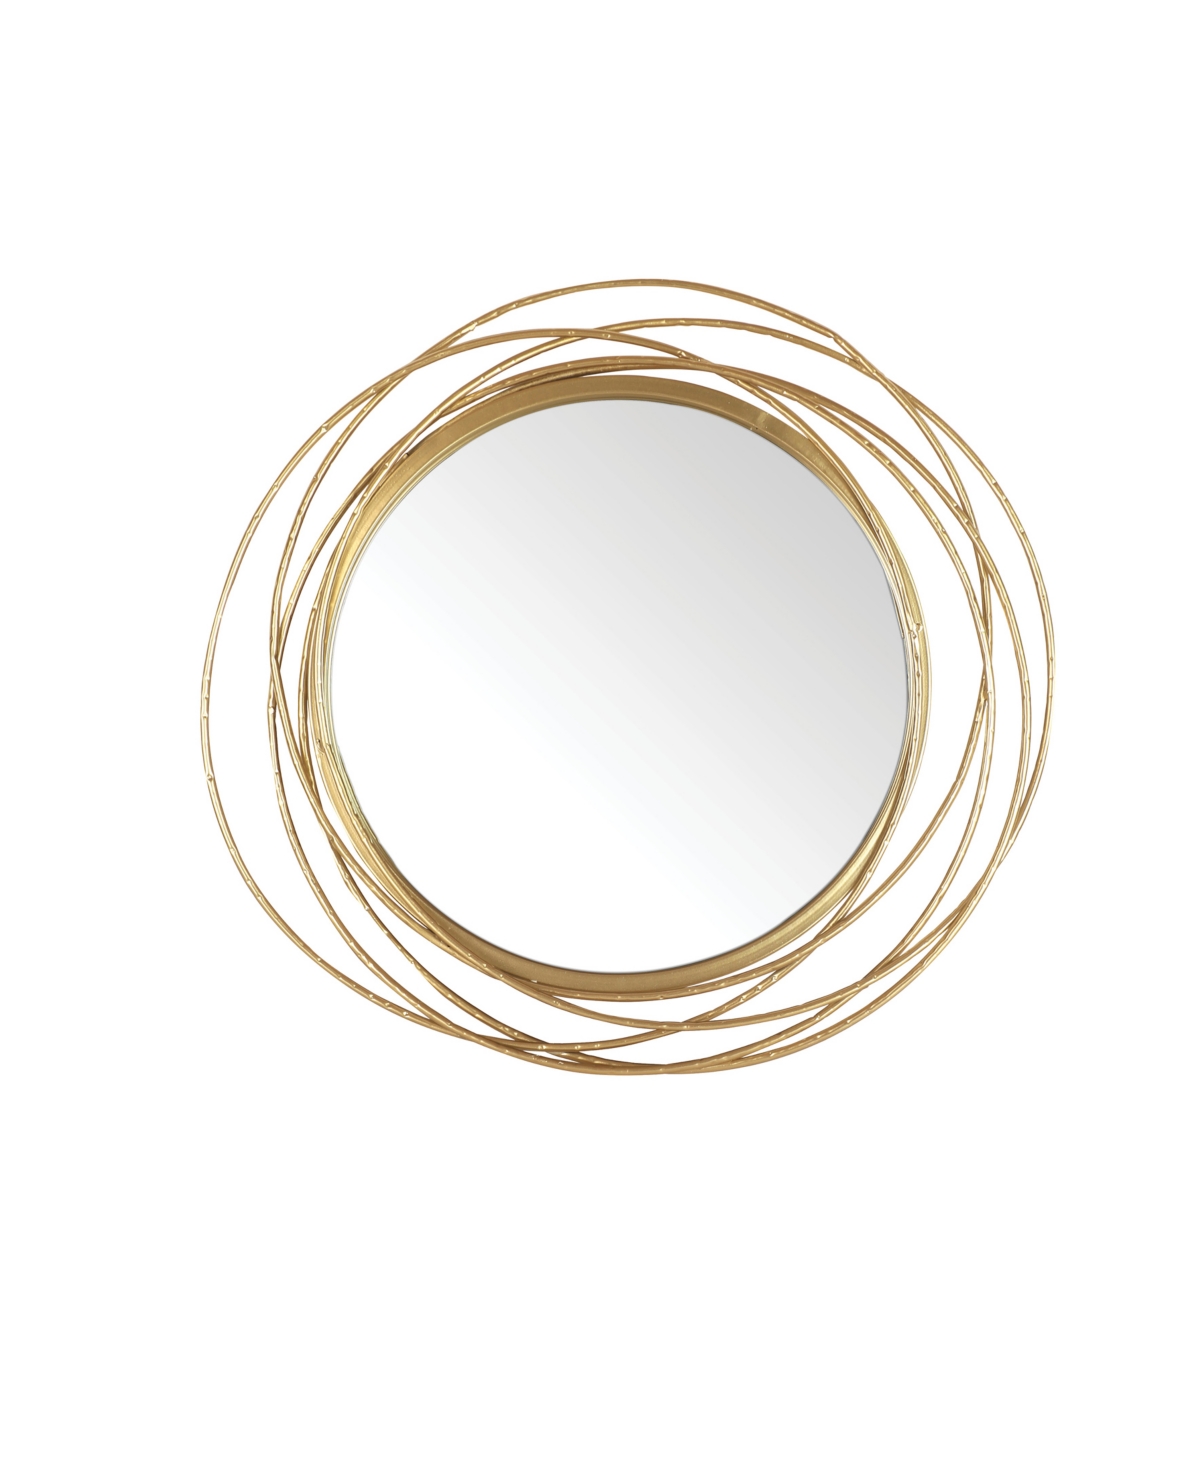 Decorative Round Rings Mirror, 27.25" D - Gold